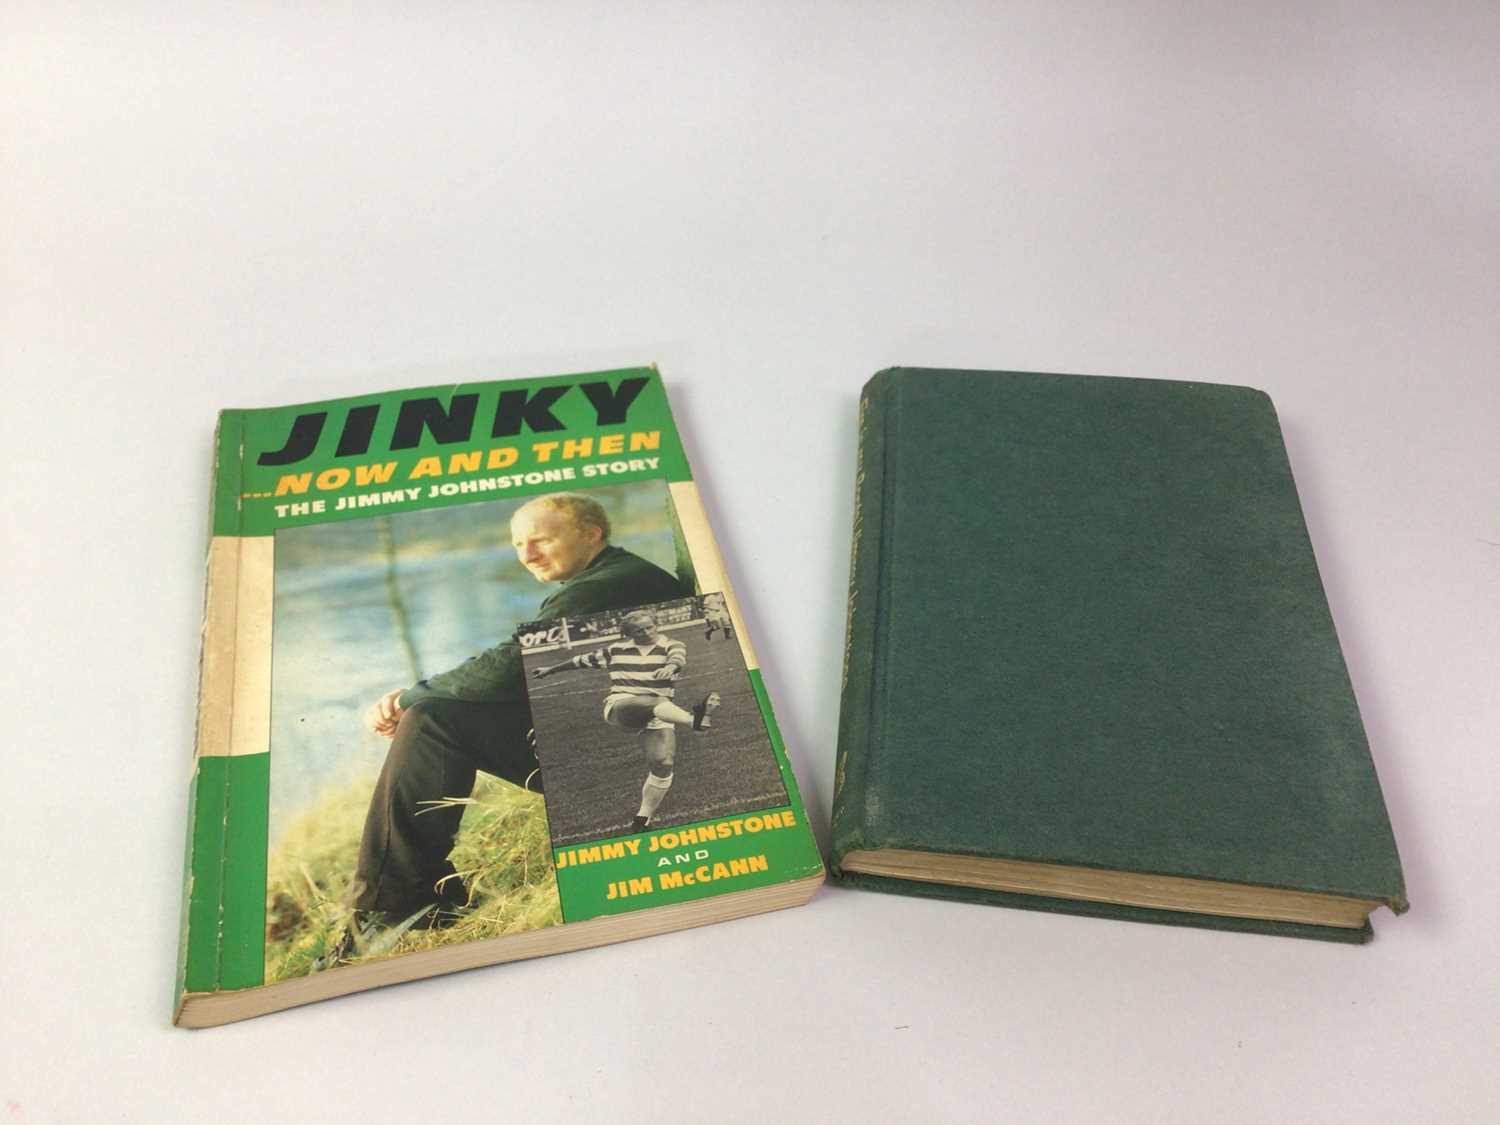 SIGNED COPY OF JIMMY JOHNSTONE'S, JINKY NOW AND THEN, ALONG WITH A SIGNED PHOTOGRAPH - Image 2 of 2